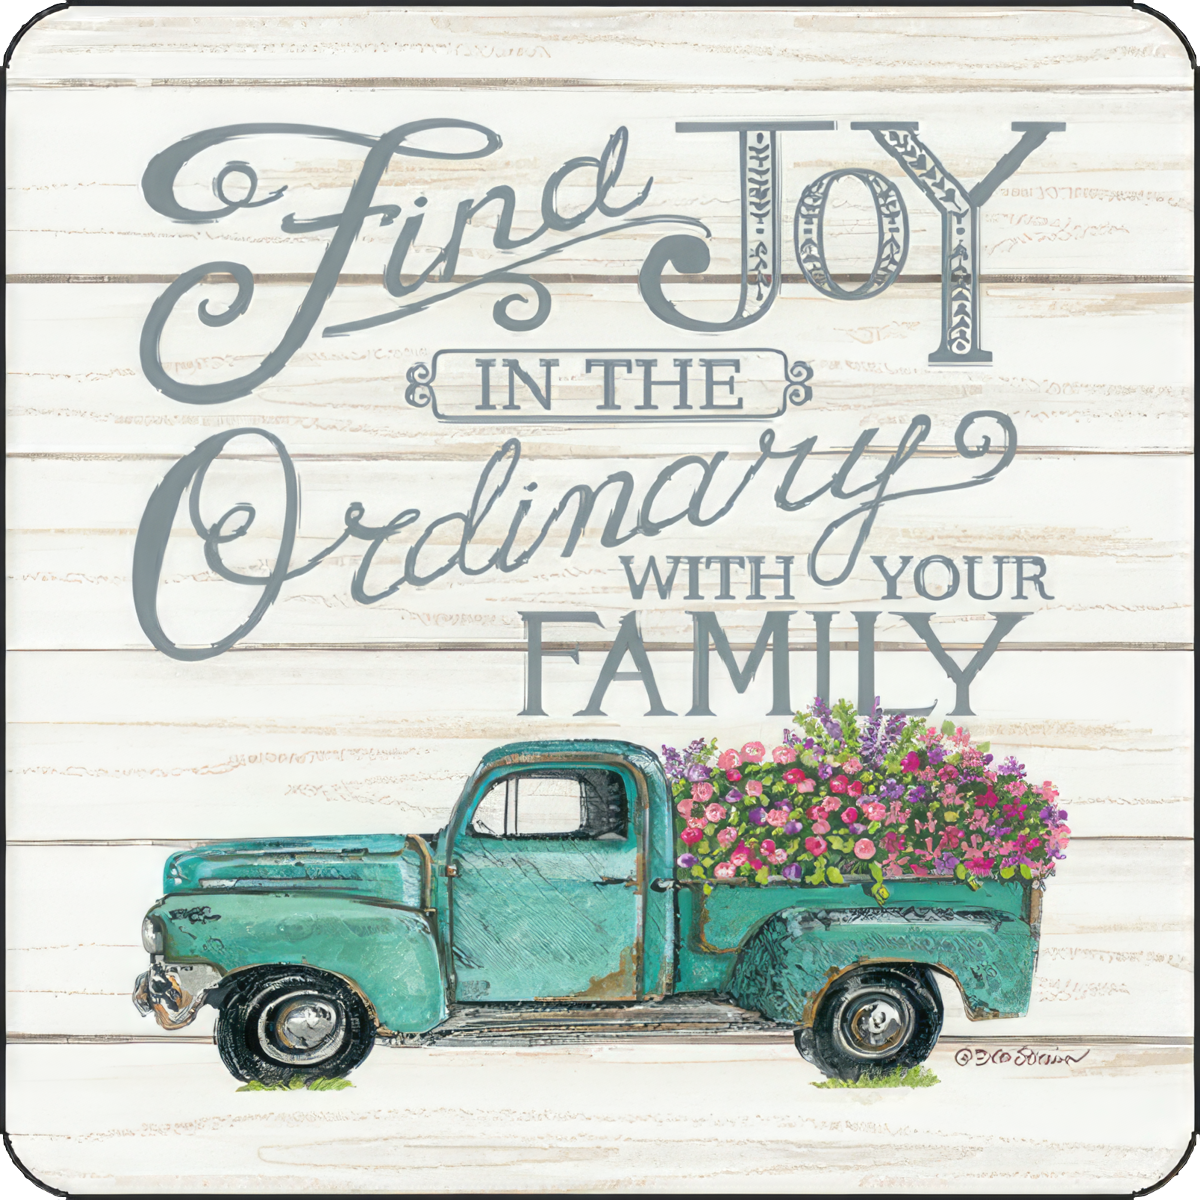 Find Joy in the Ordinary with Family